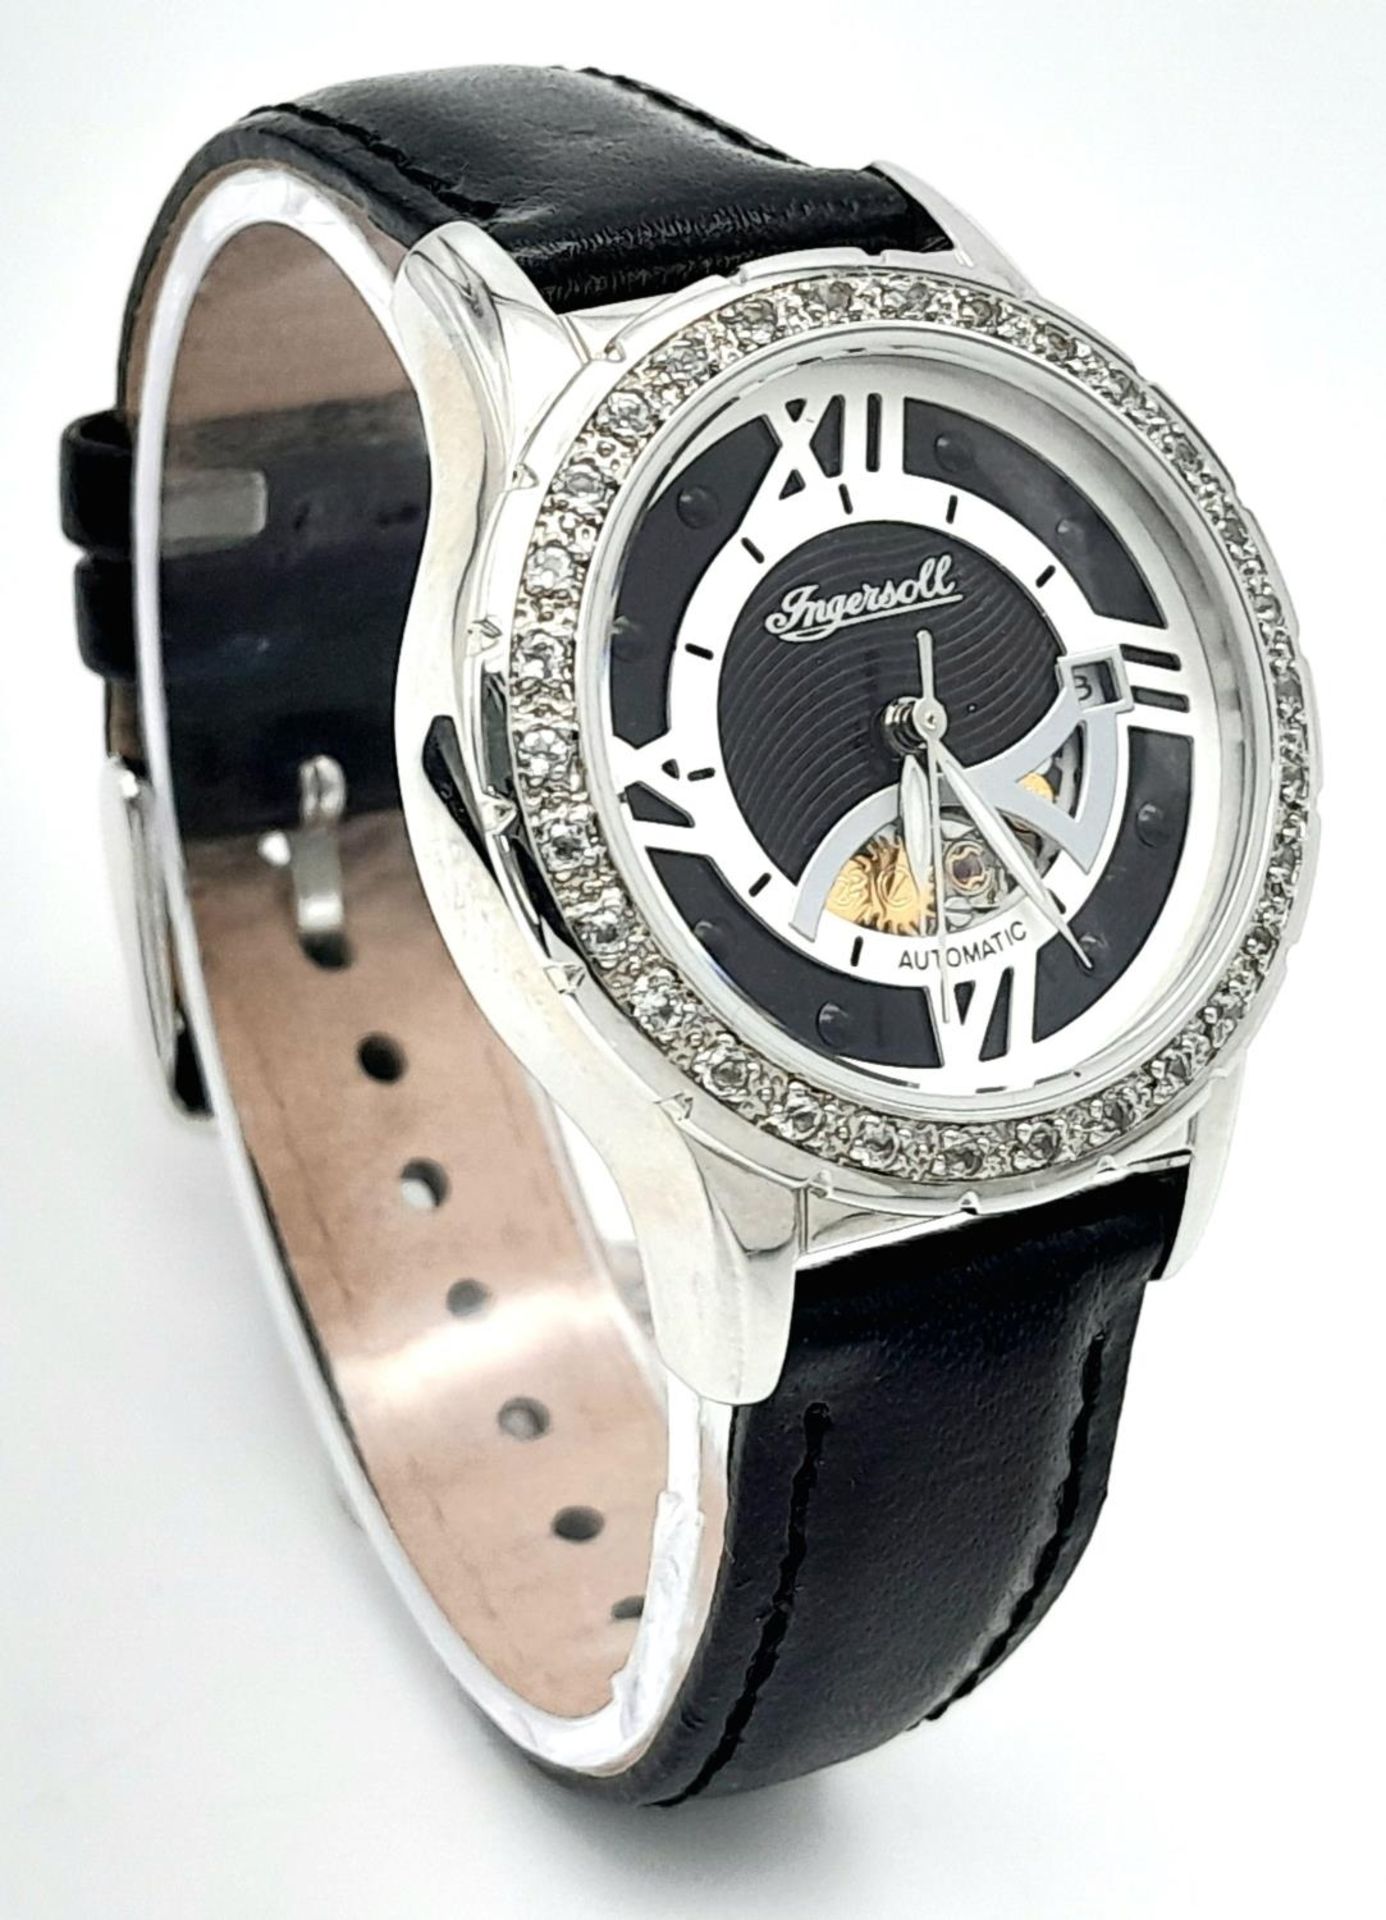 An Ingersoll Automatic Skeleton Ladies Watch. Black leather strap. Stainless steel case - 32mm. - Image 3 of 6